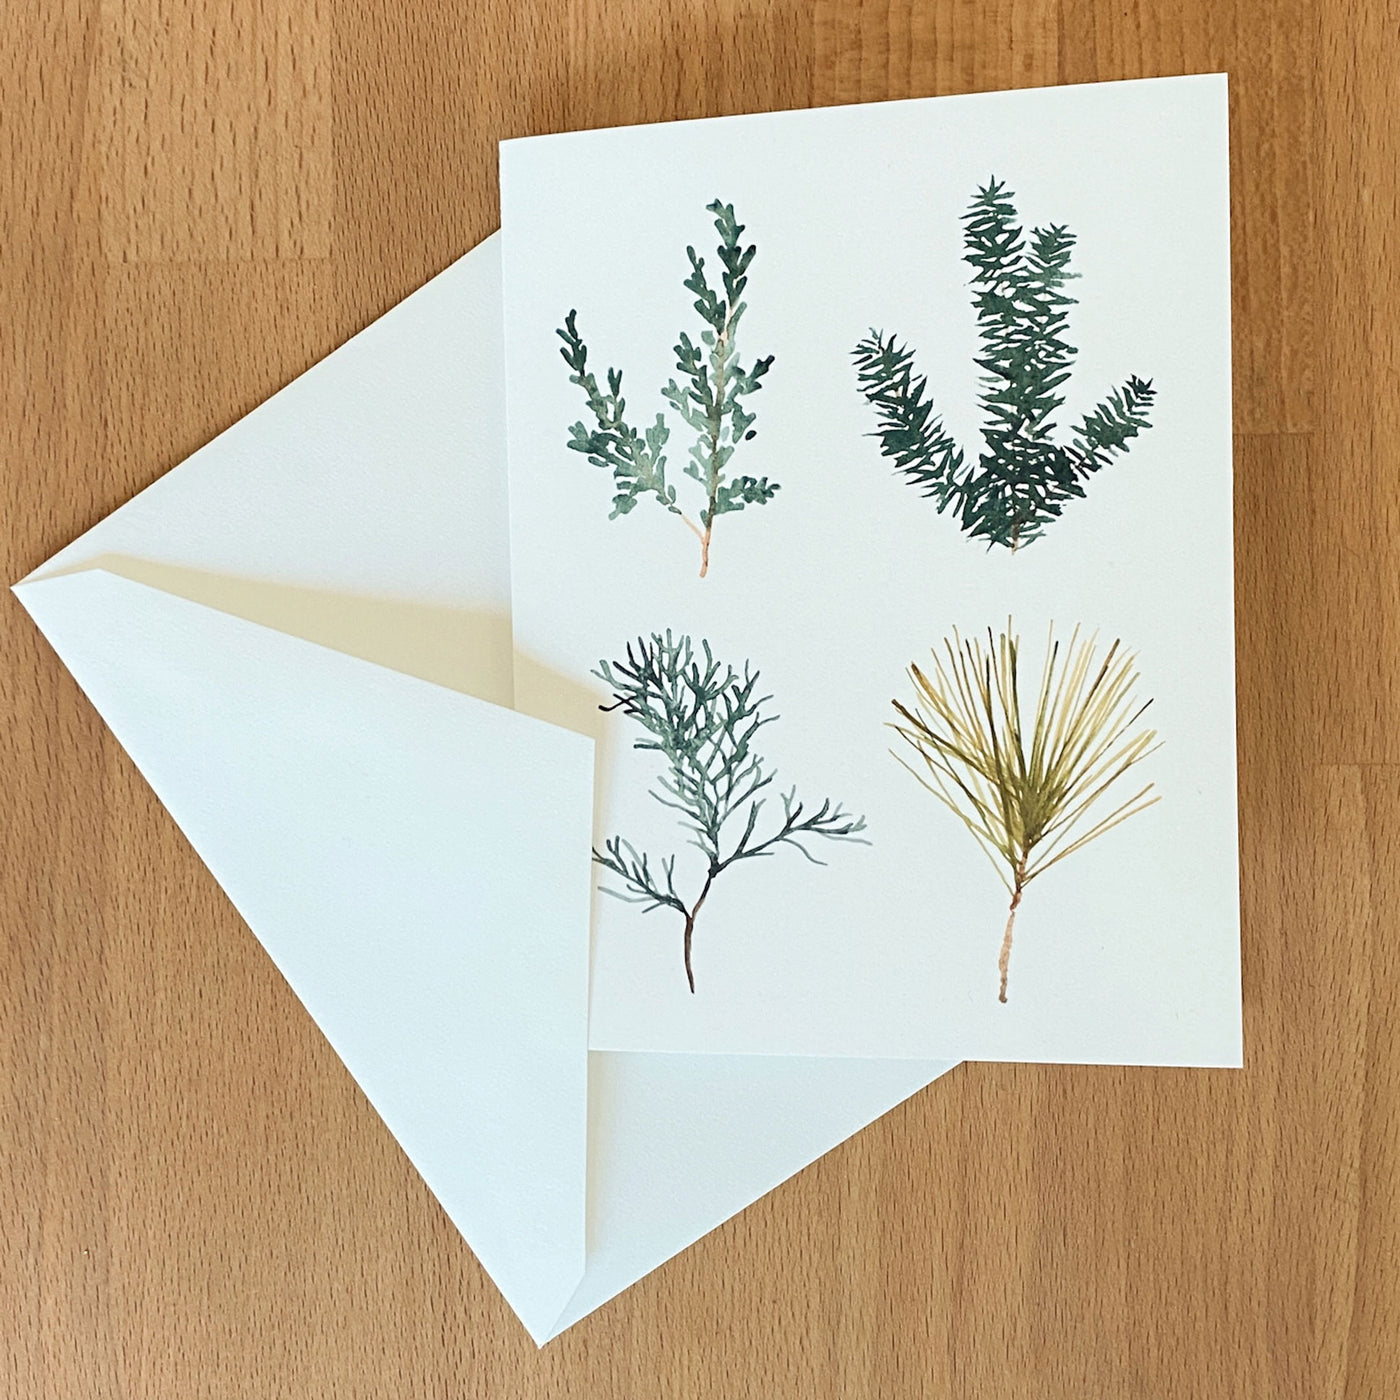 Watercolor Card of four pine tree sprigs